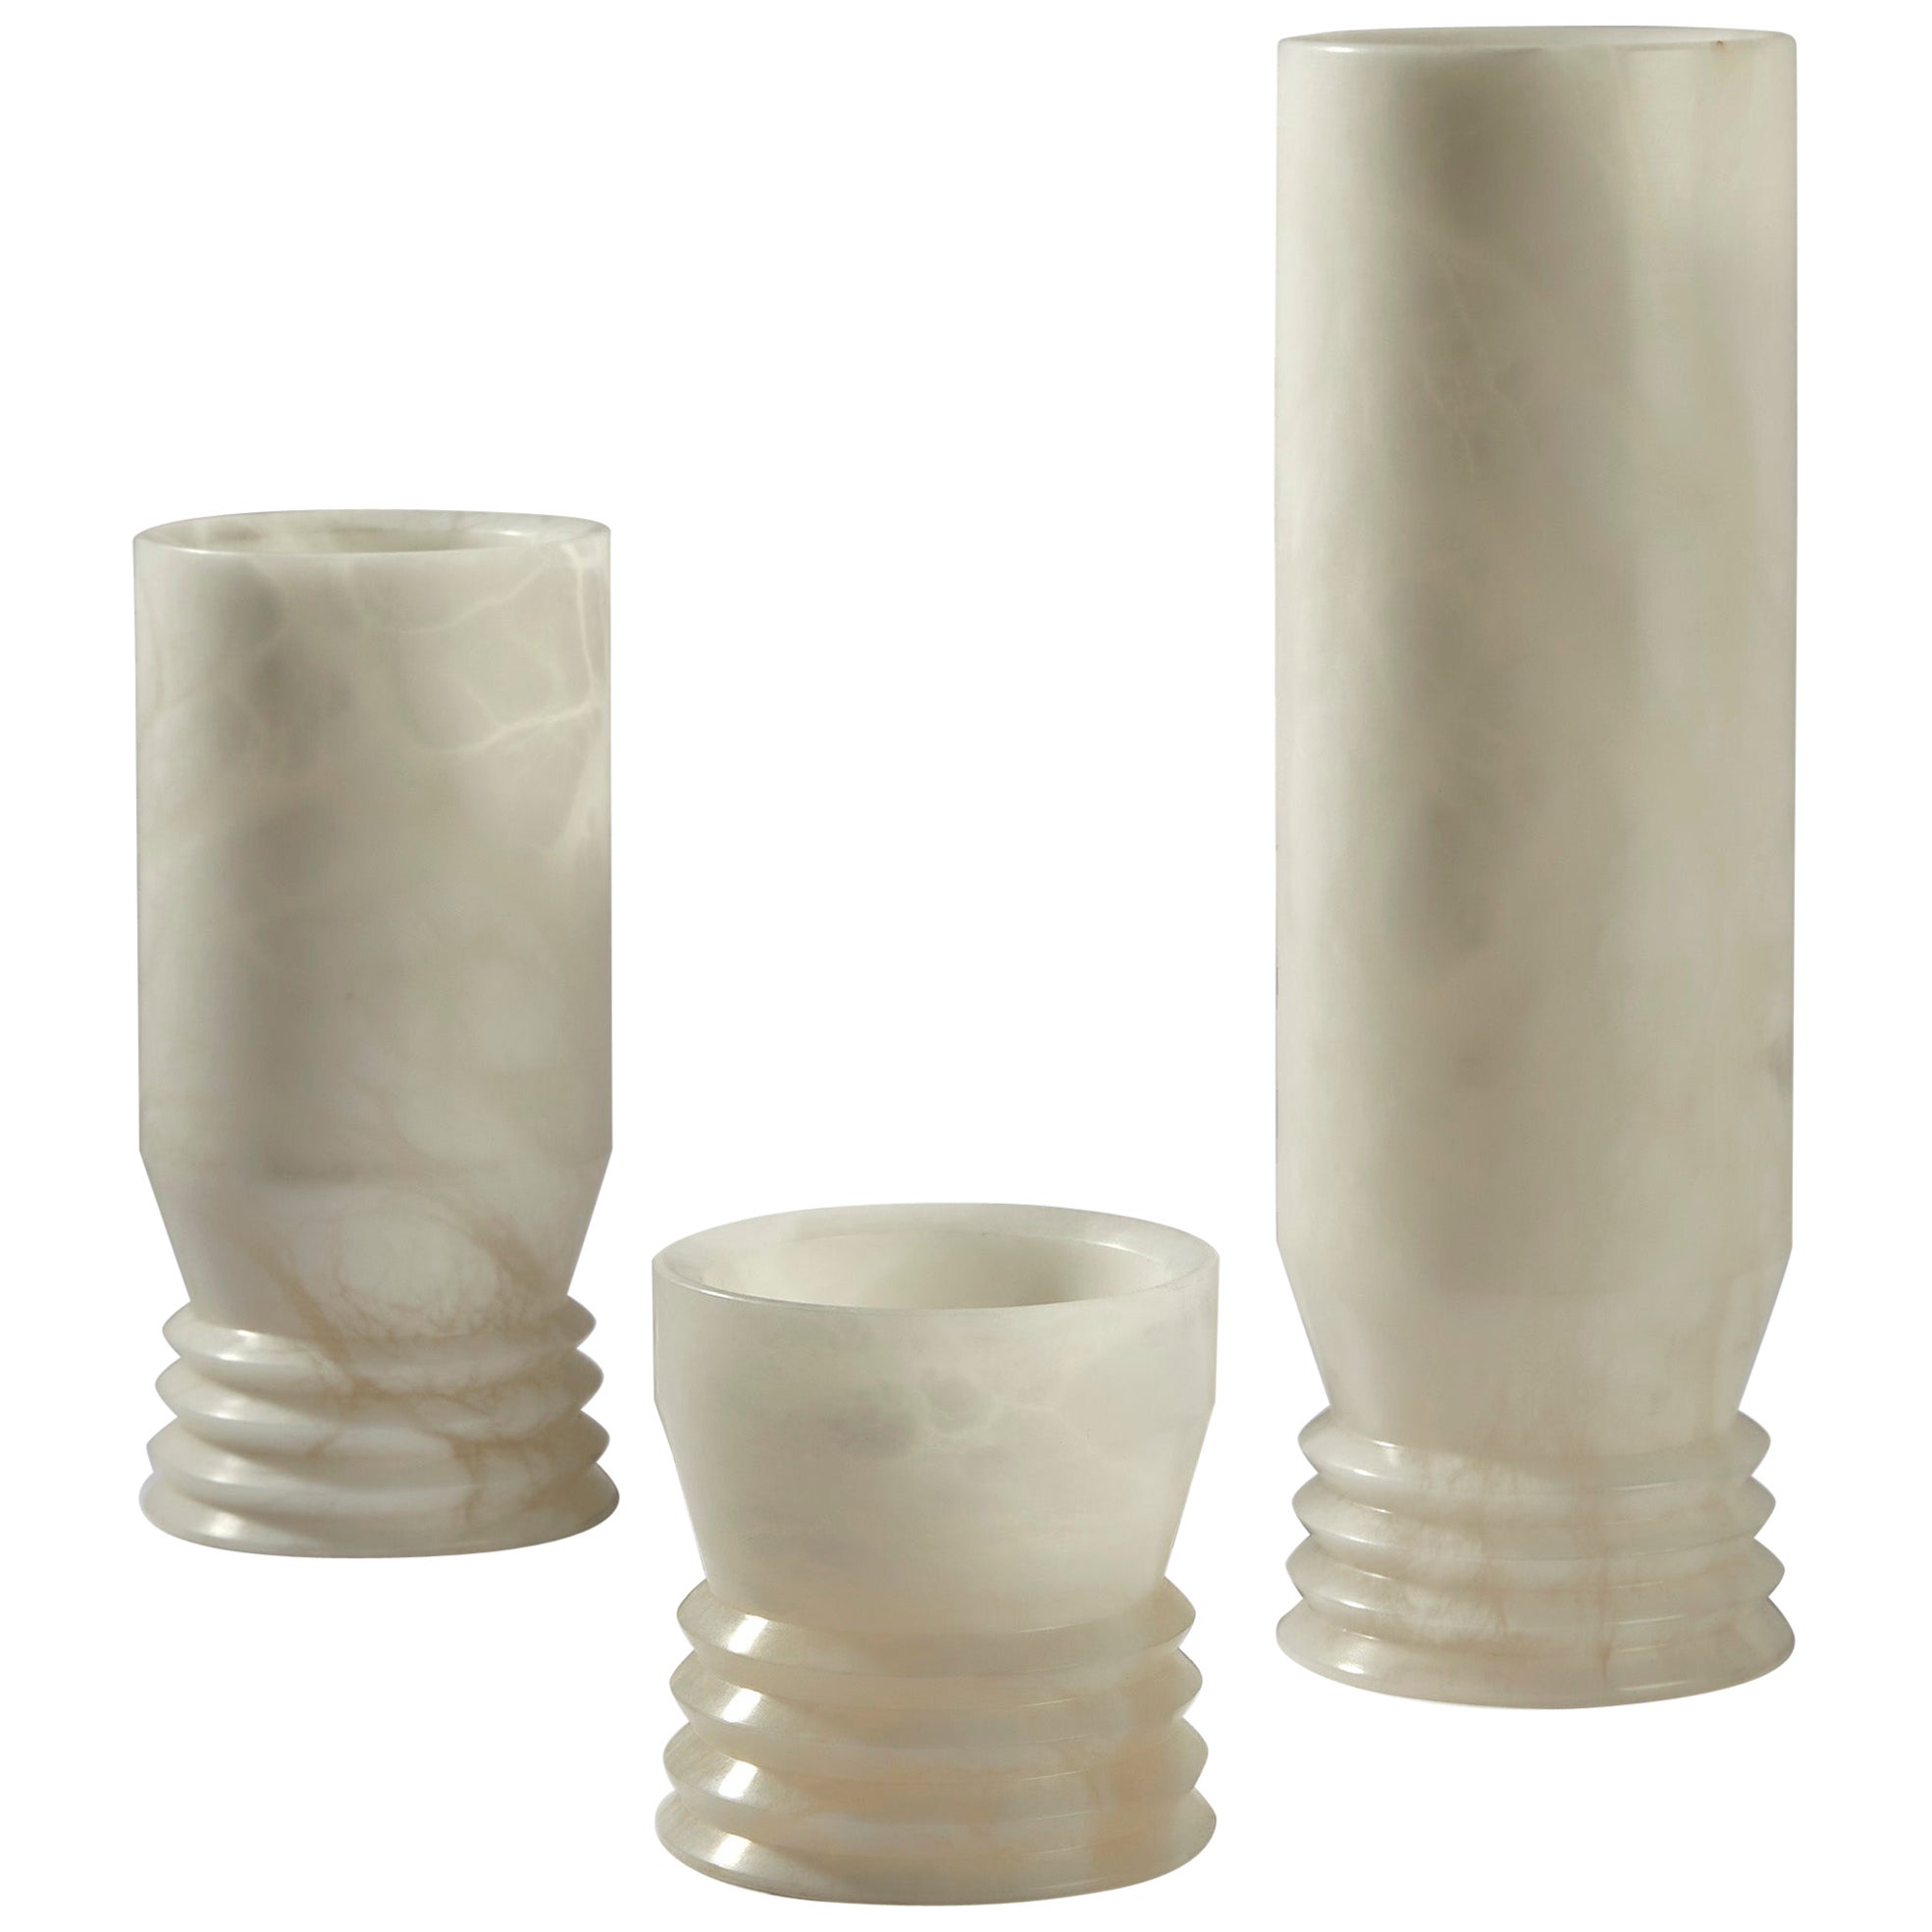 "Strato" Vase Set in Tuscan Alabaster by Andrea Grecucci For Sale